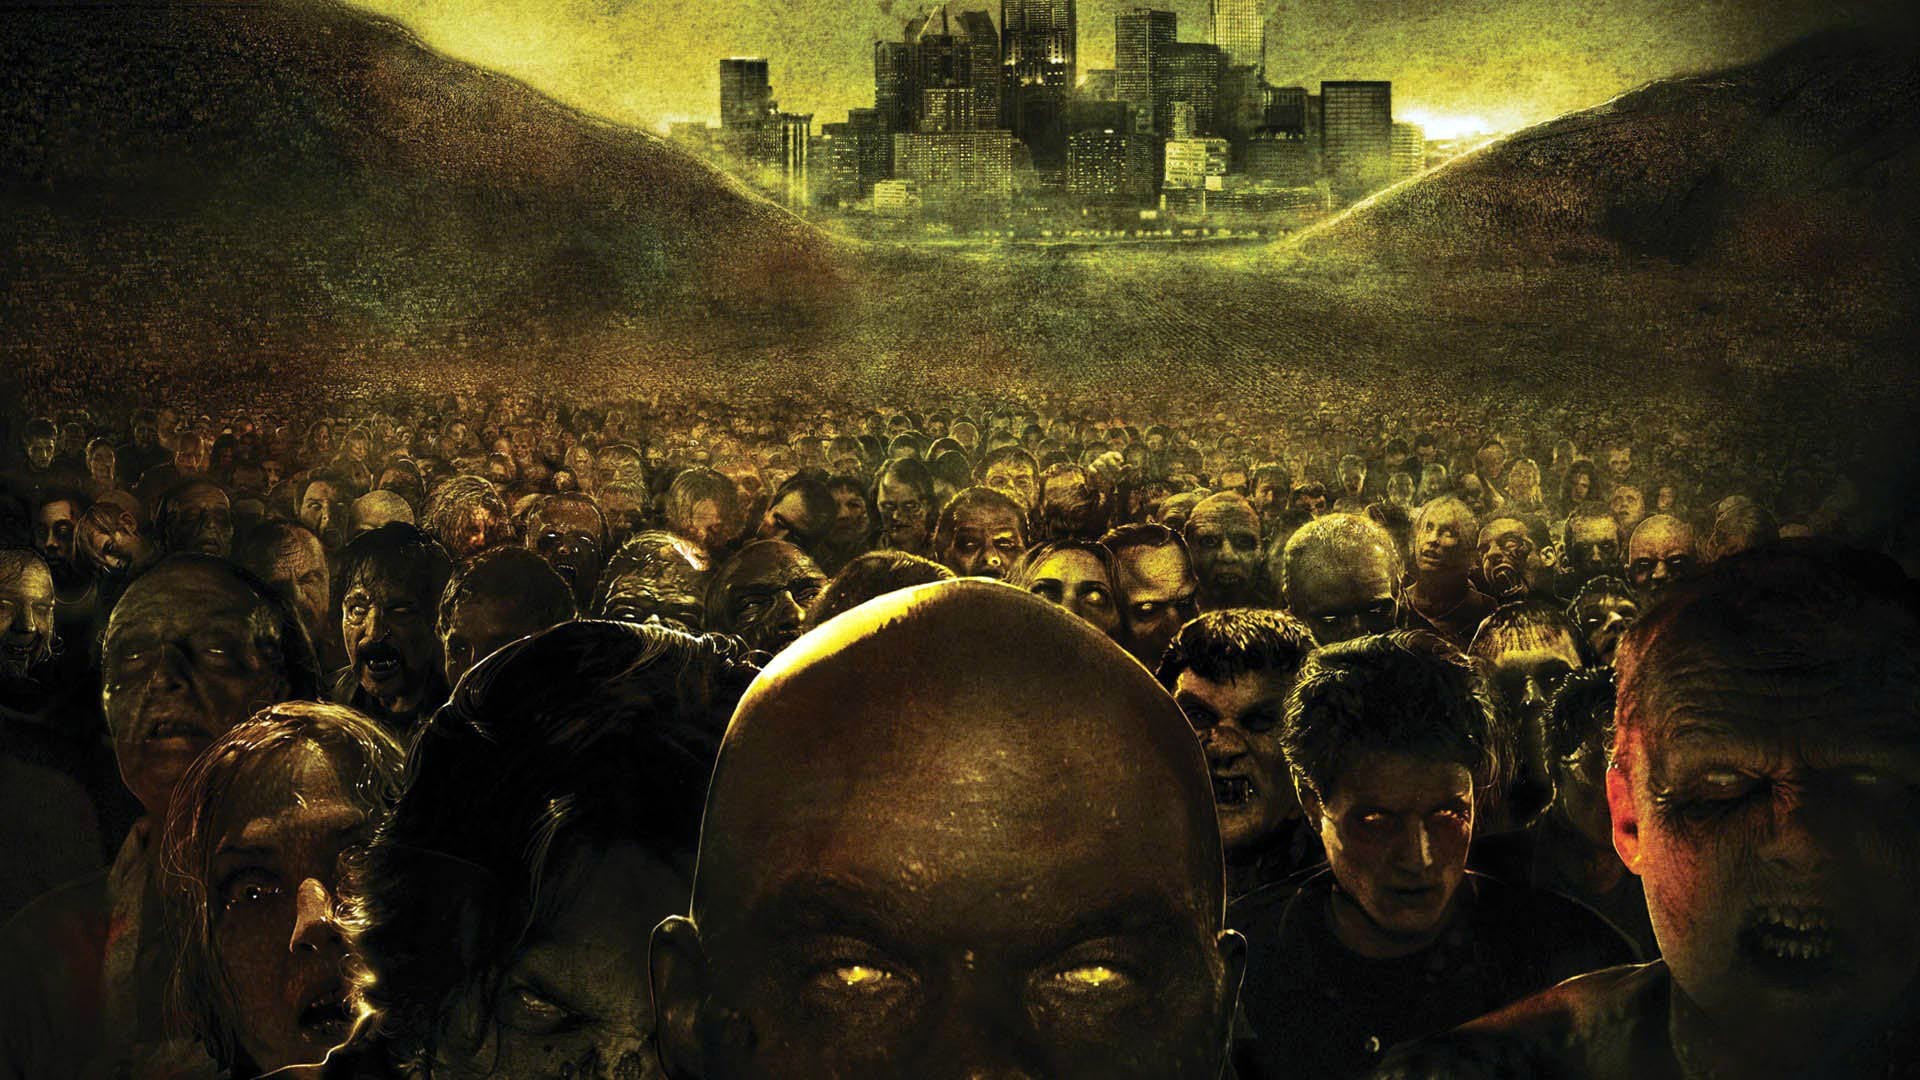 General 1920x1080 zombies movies undead apocalyptic Land of the Dead (Movie)